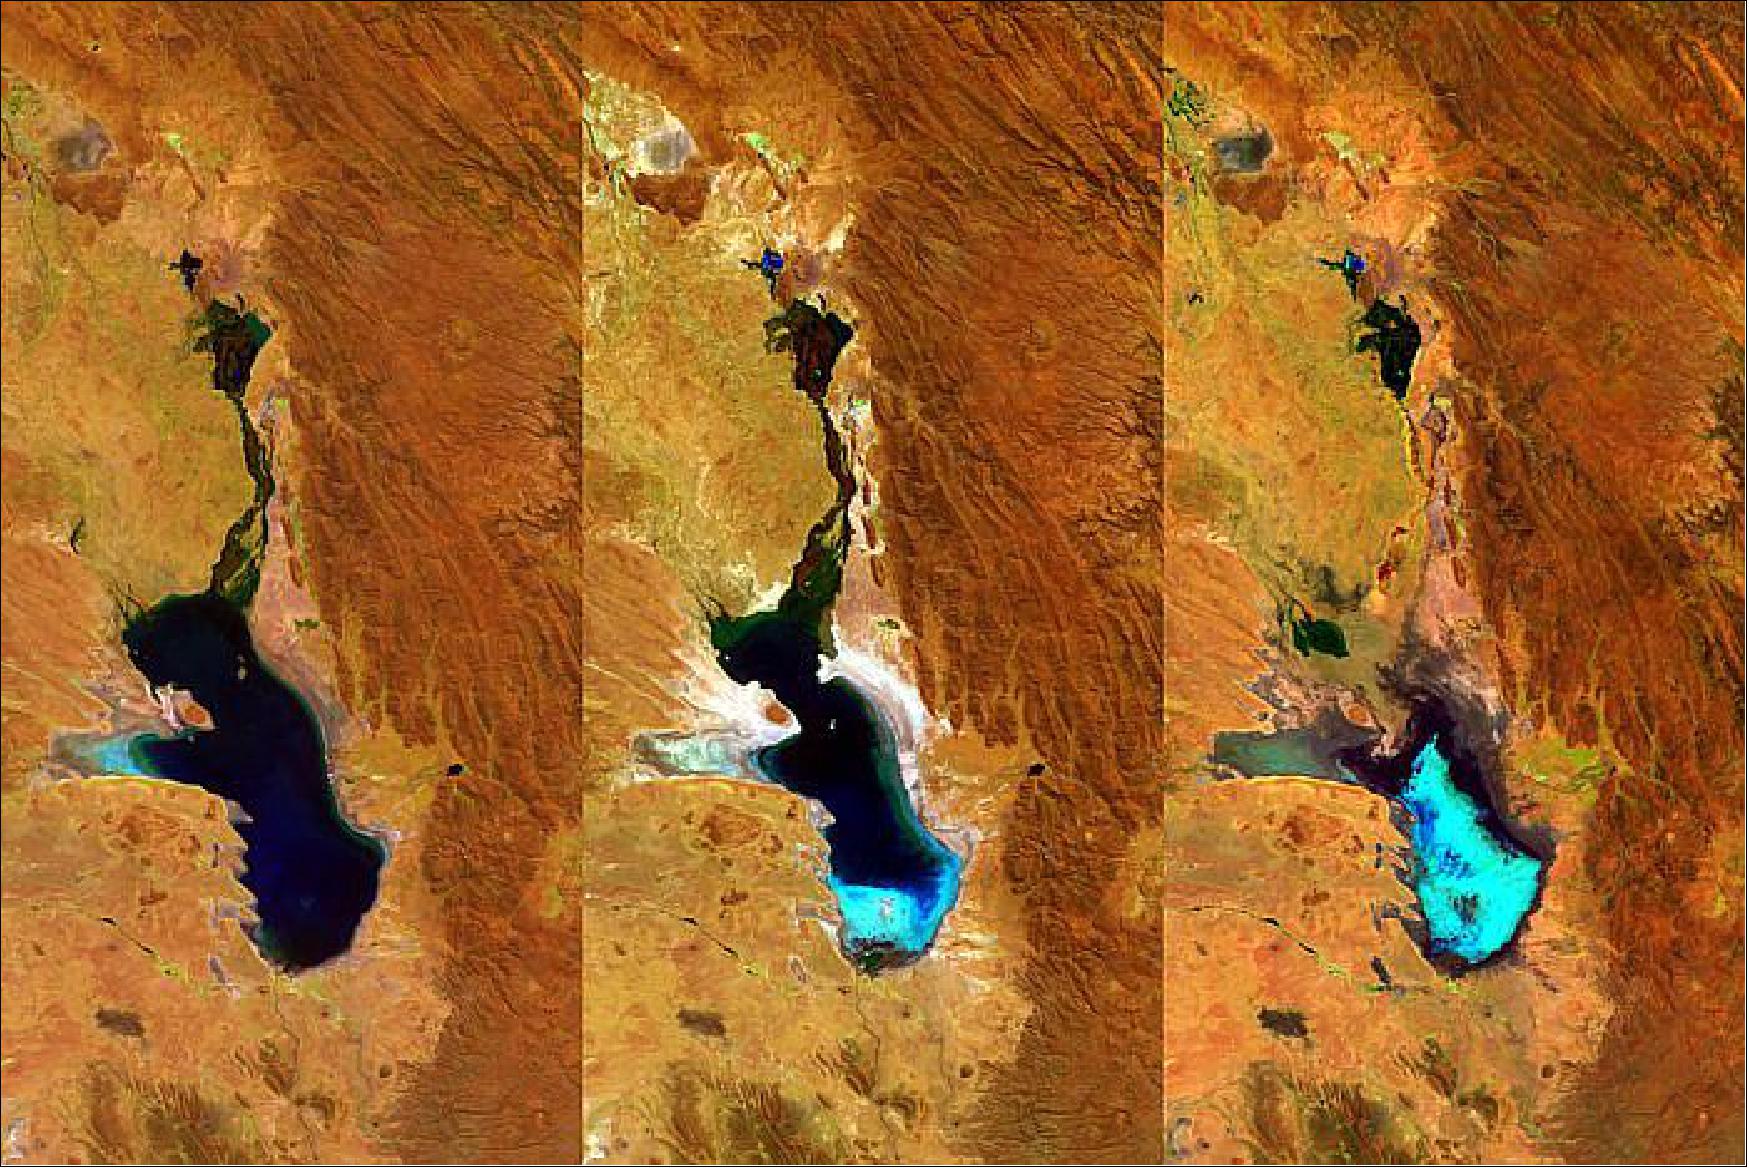 Figure 48: PROBA-V tracks Lake Poopó evaporation in Bolivia. The three 100-m resolution PROBA-V images shown here were acquired on 27 April 2014, 20 July 2015 and 22 January 2016 respectively (image credit: ESA, BELSPO, VITO) 65)